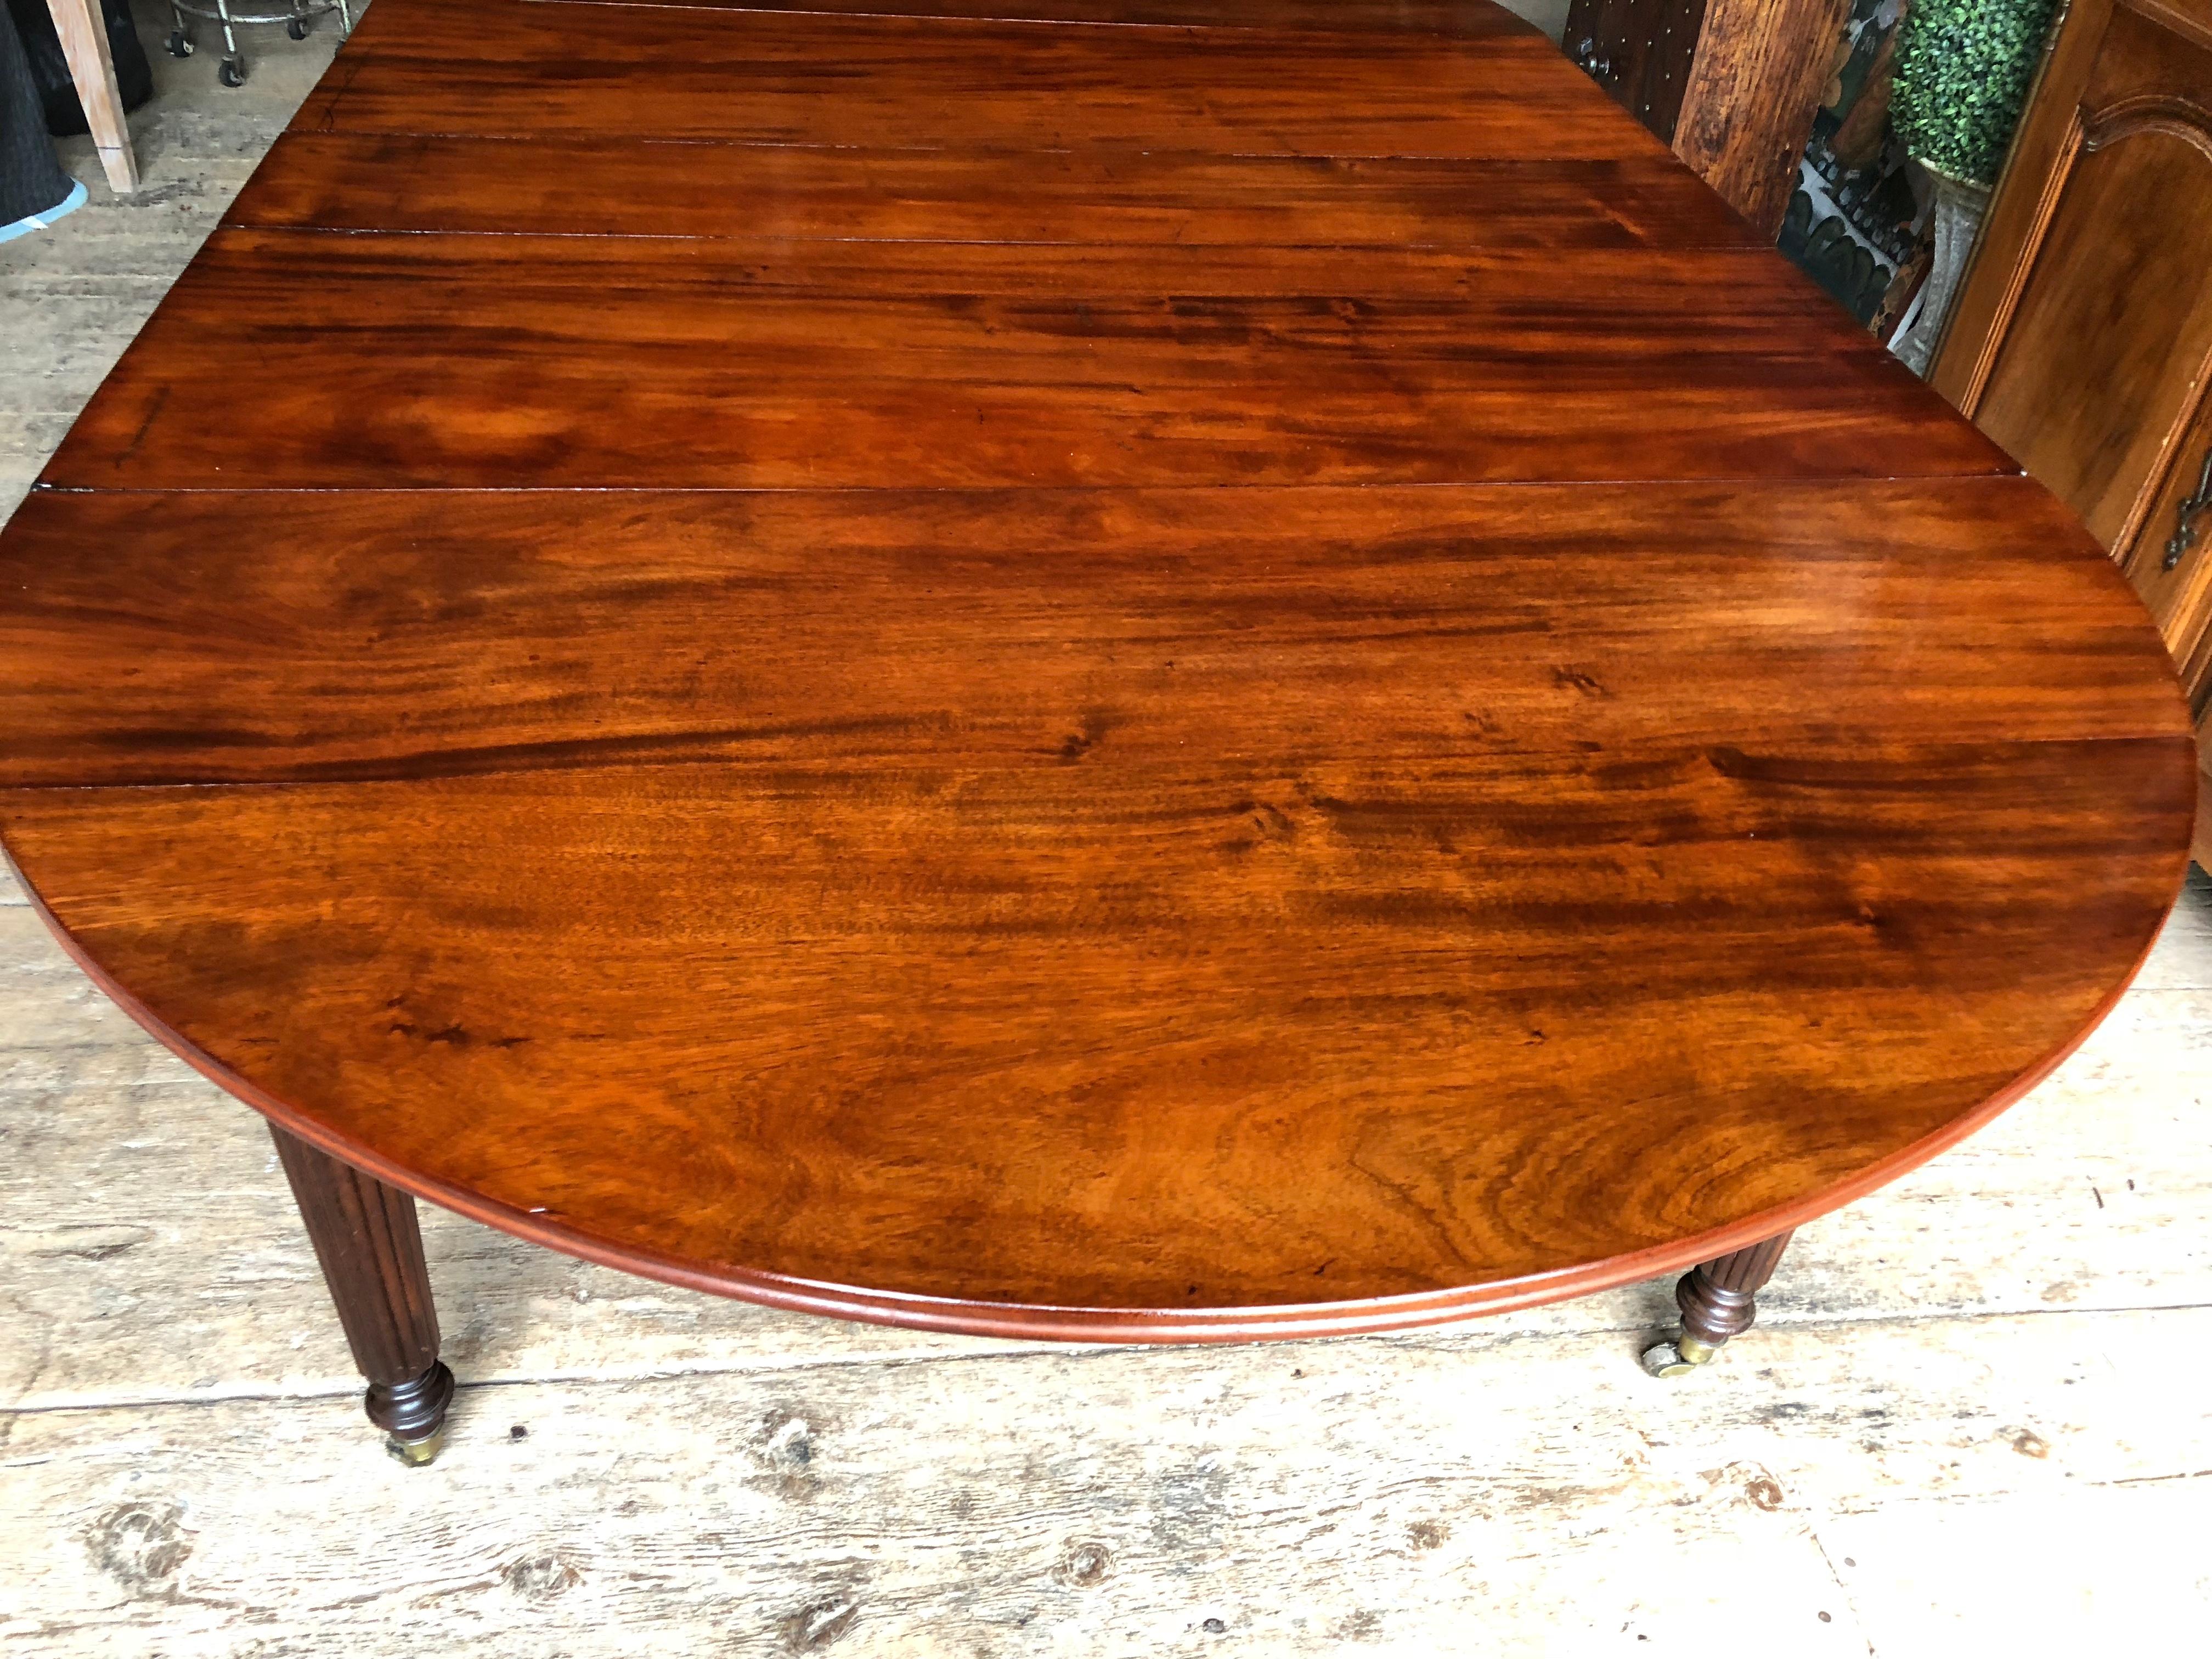 A large expandable French Louis Philippe period drop-leaf dining table in solid mahogany (not veneer) with three additional leaves allowing for seating for 14.
The Cuban mahogany top rests on an oak mechanism that opens and closes easily. The legs